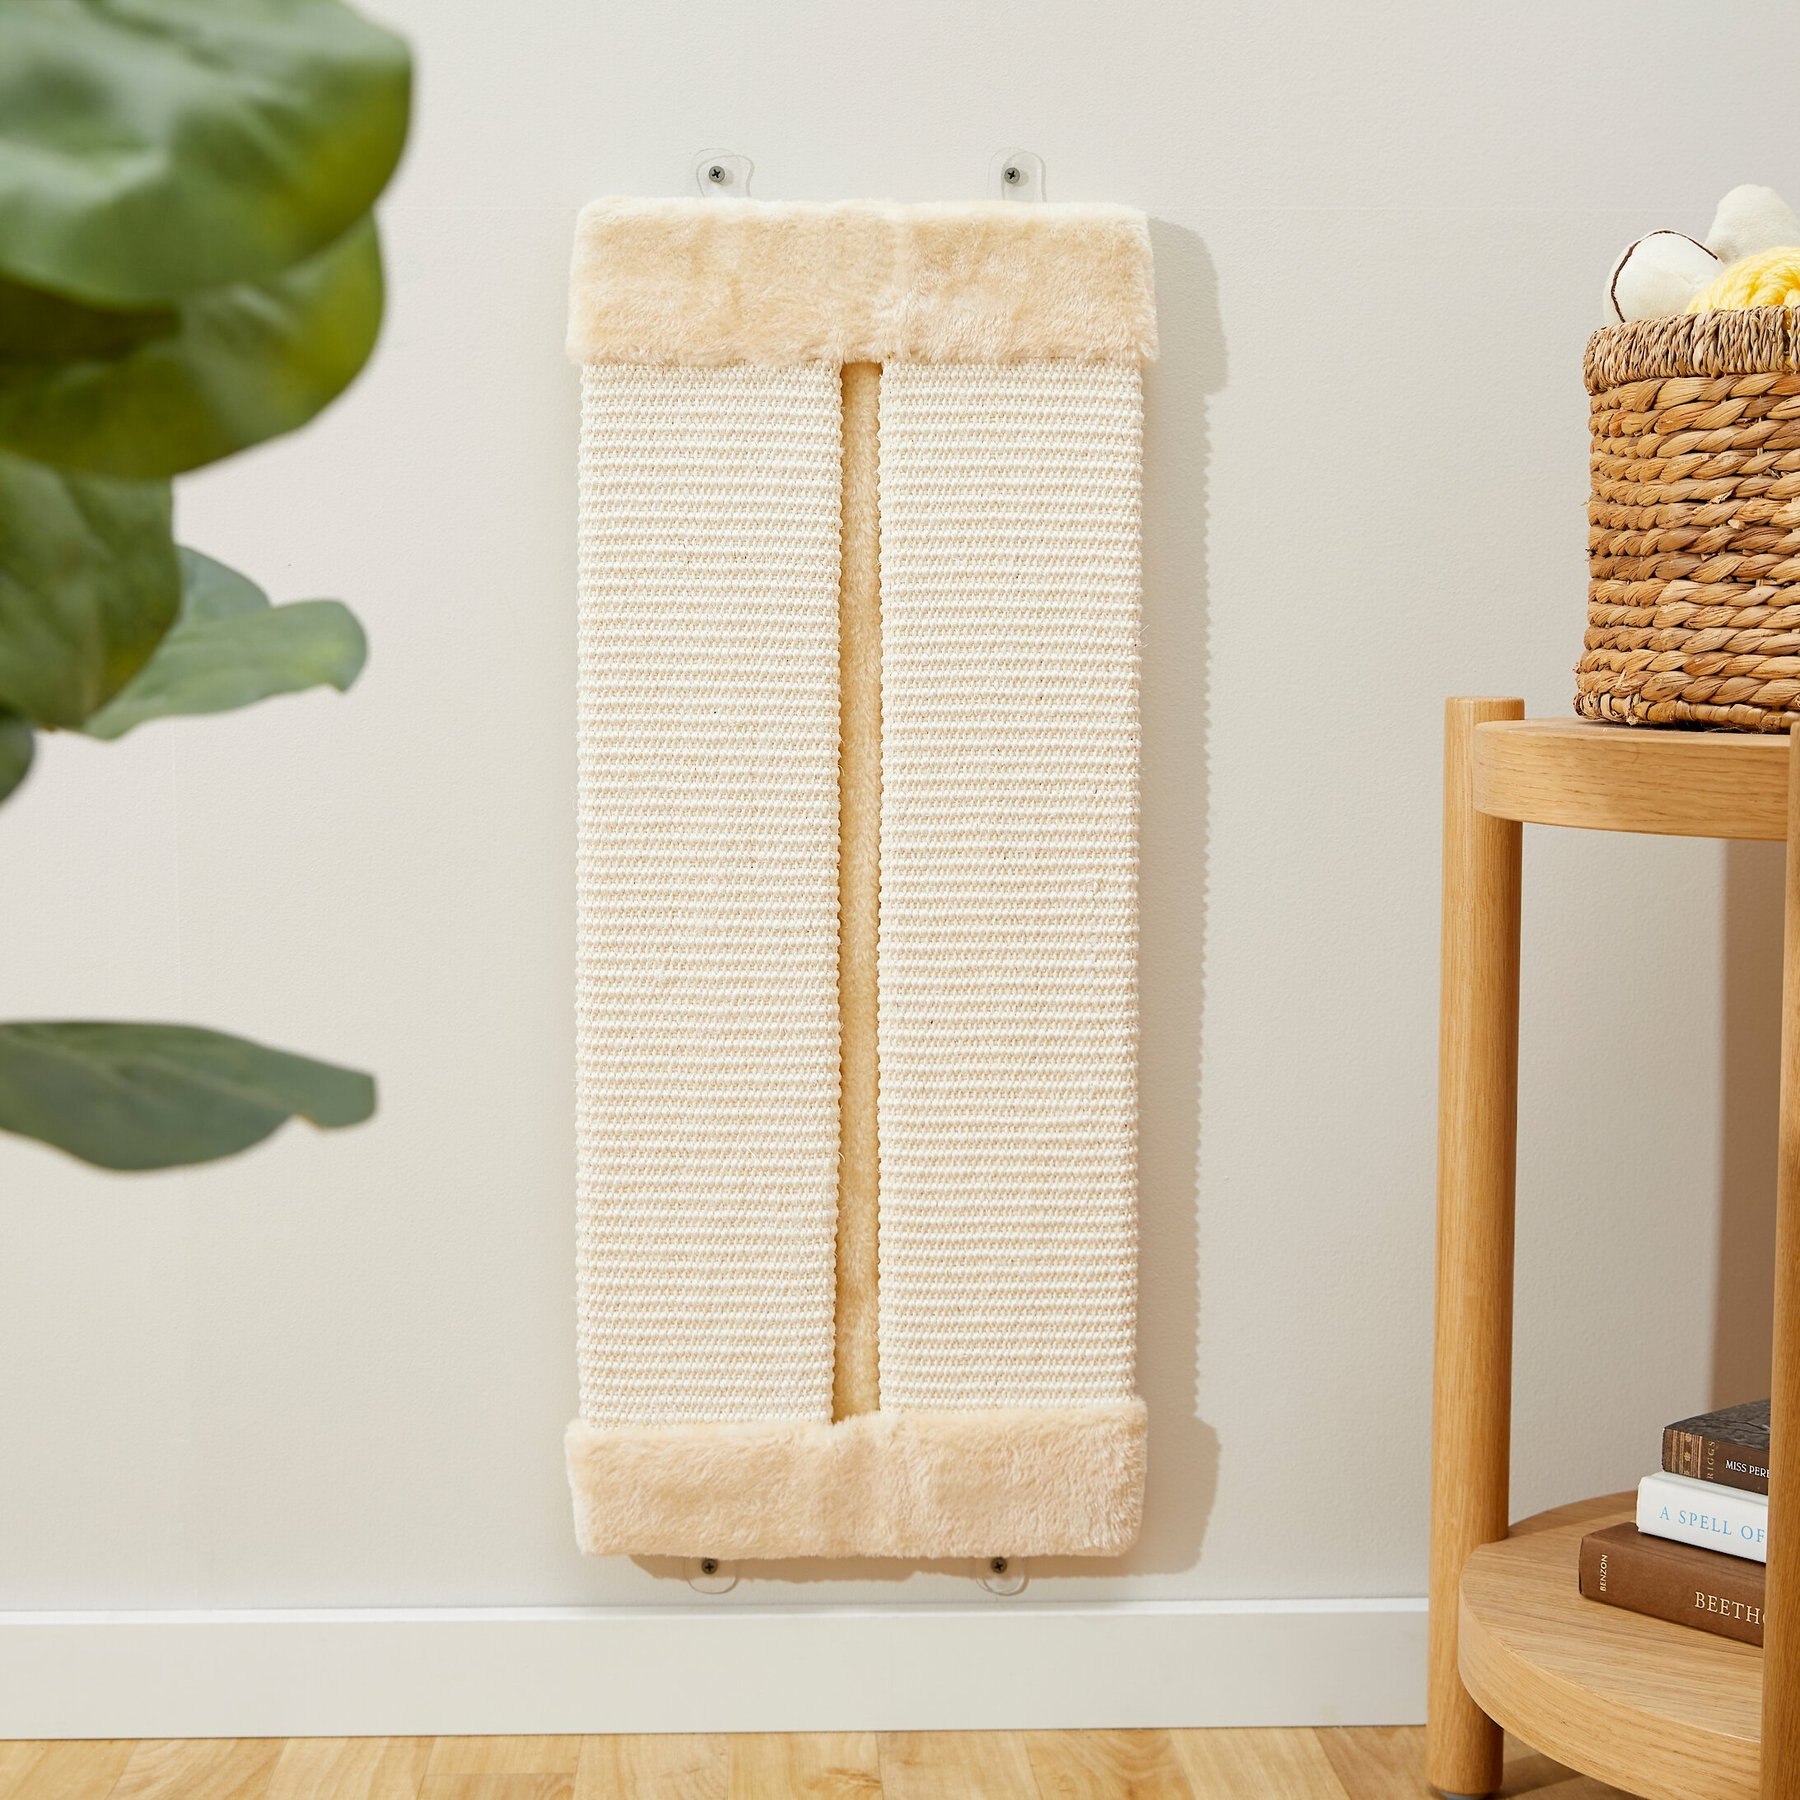 Akarden Cat Scratching Post for Floor or Wall Durable Sisal Board Scratcher for Kitty’s Health and Good Behavior